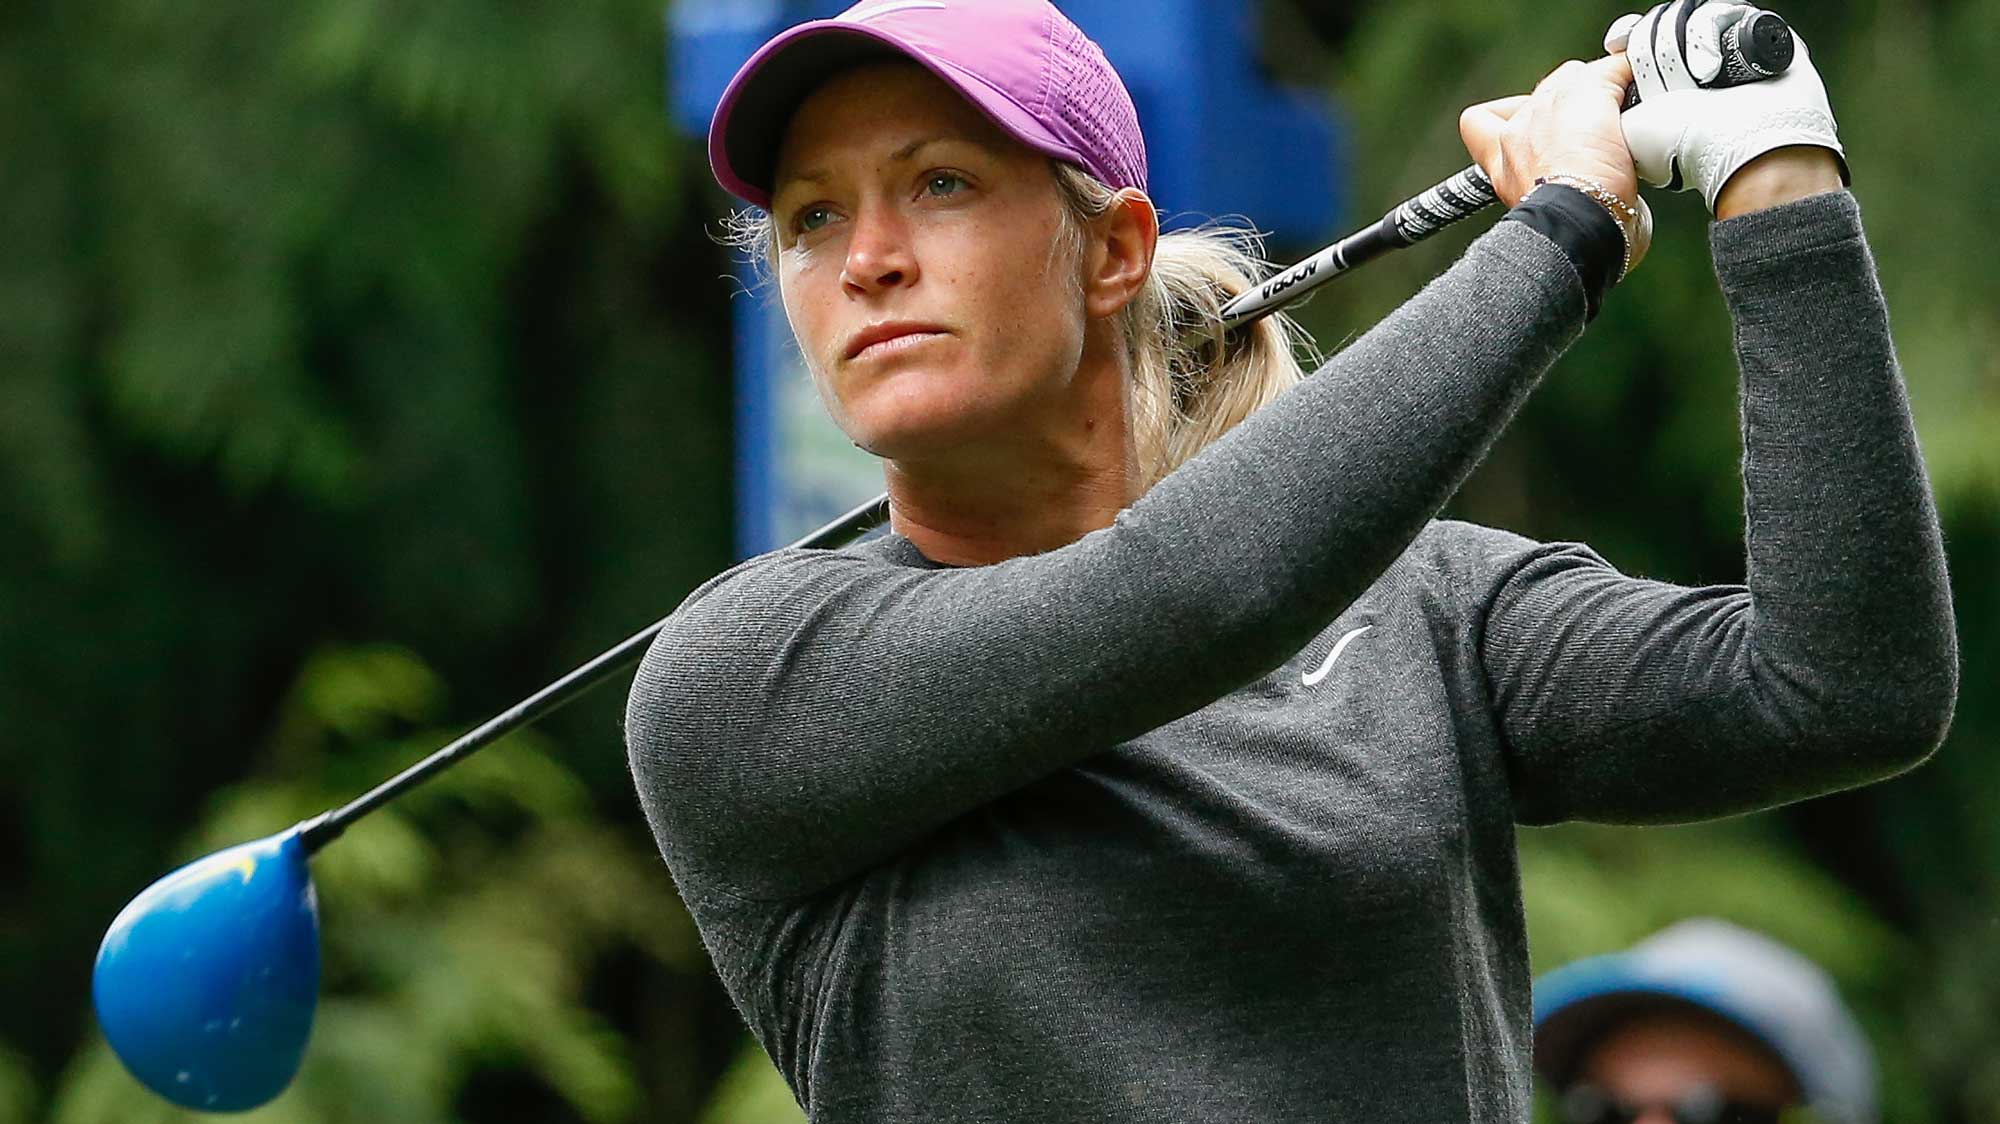 Suzann Pettersen of Norway hits a tee shot on the fourth tee during the second round of the KPMG Women's PGA Championship